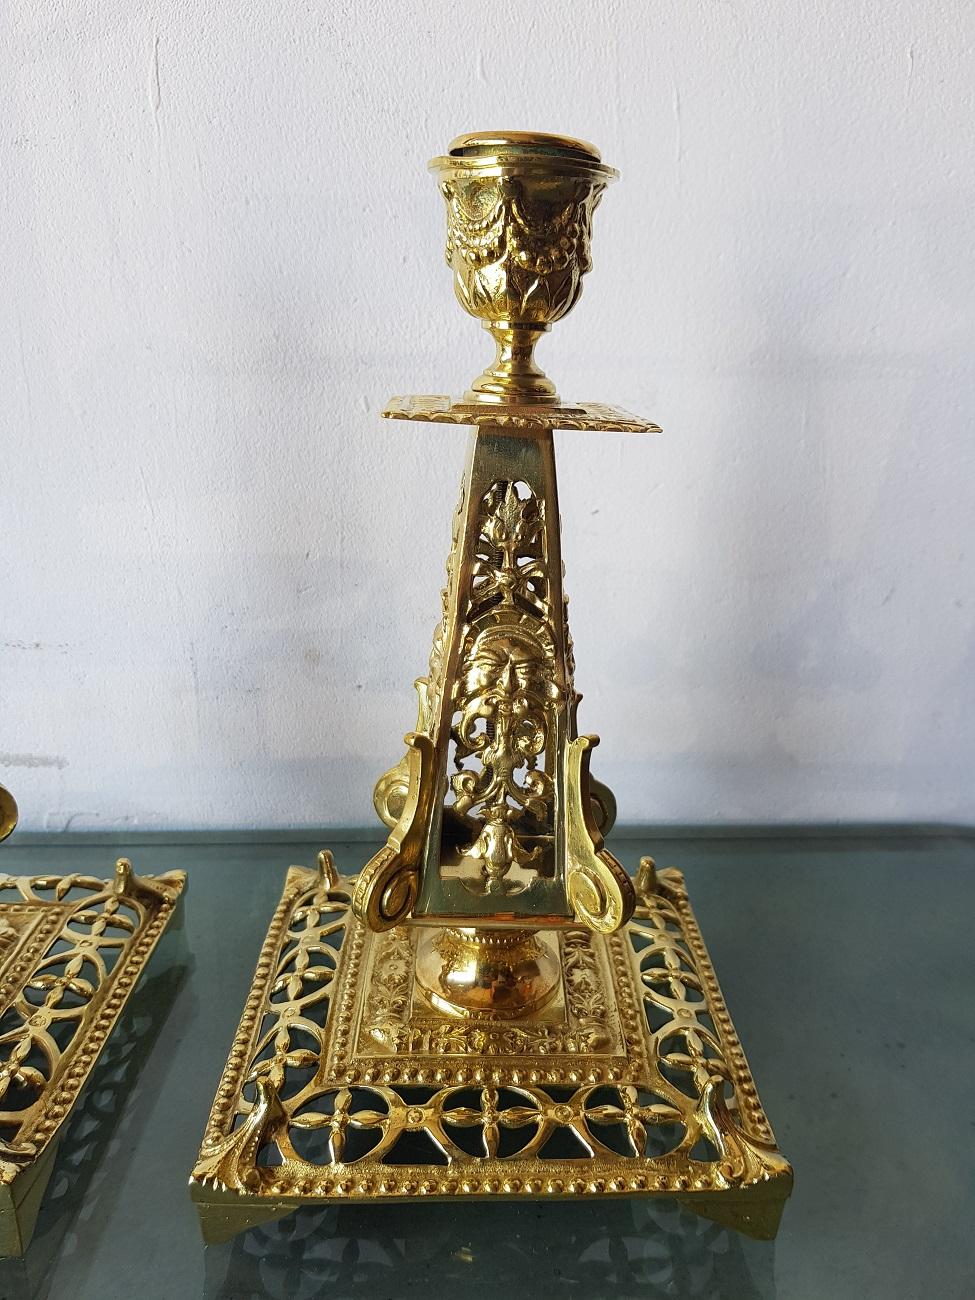 A pair of two beautiful French openworked brass candlesticks with grotesque heads all around, the are made in the 19th century.

The measurements are,
Depth 13 cm/ 5.1 inch.
Width 13 cm/ 5.1 inch.
Height 22.5 cm/ 8.8 inch.
 